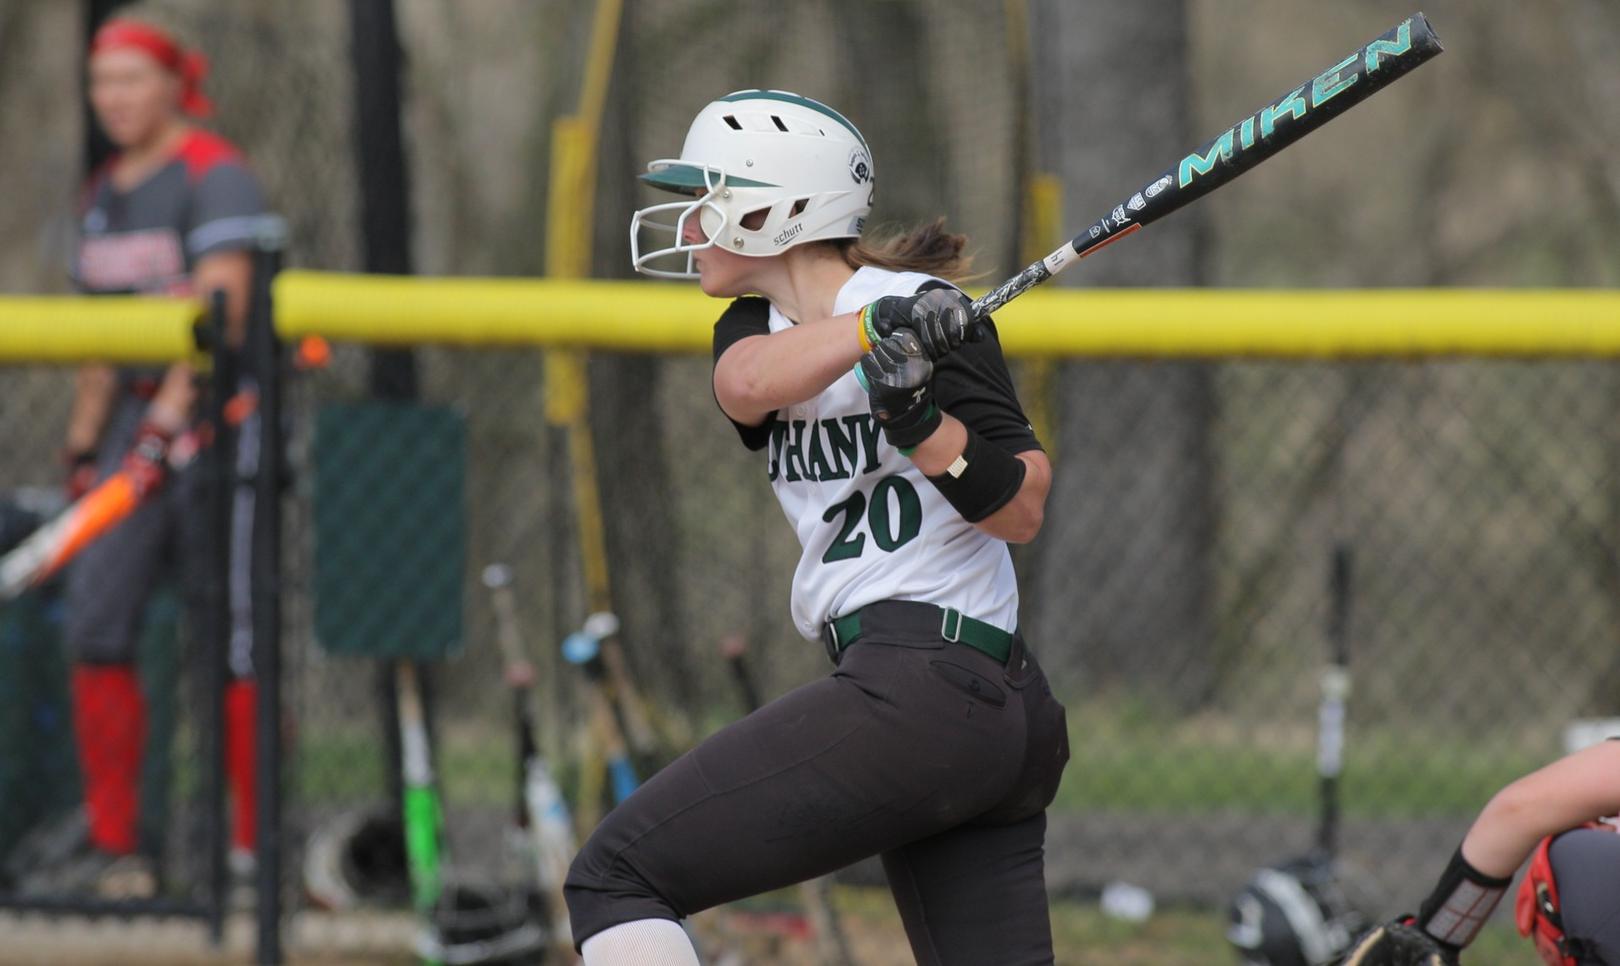 Softball scores 19 runs in sweep of Franciscan